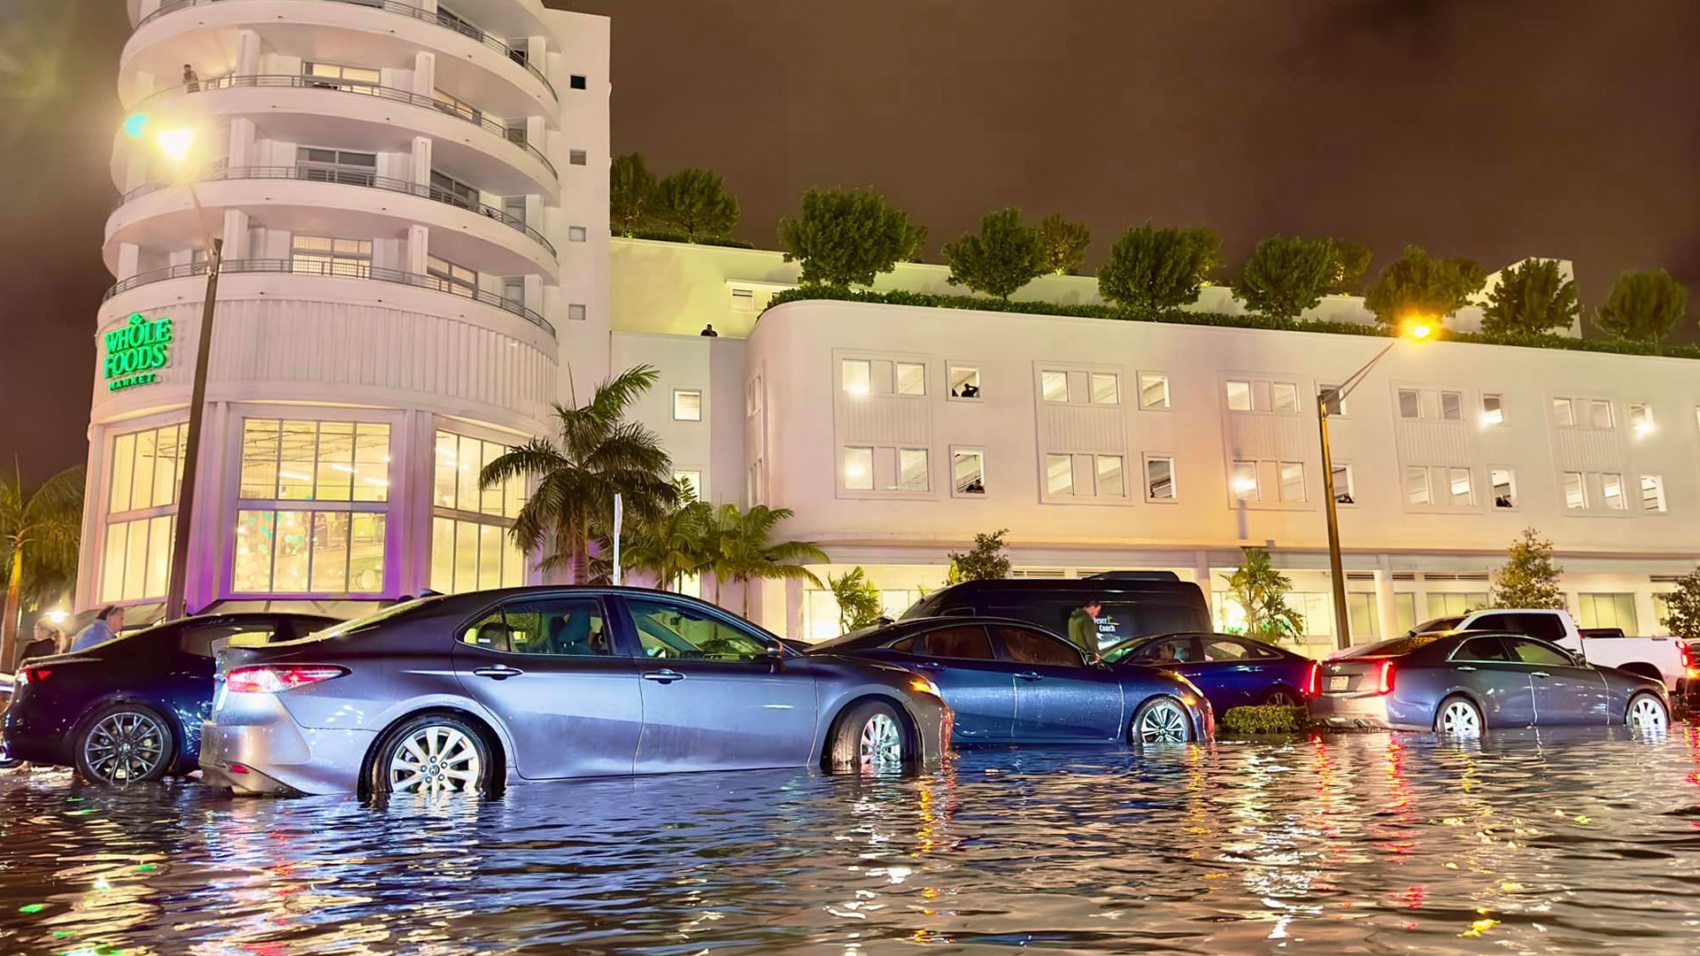 flood-related-car-accident-lawyers-fort-lauderdale_0000s_0002_342702507_756979926105758_4386594846660498758_n